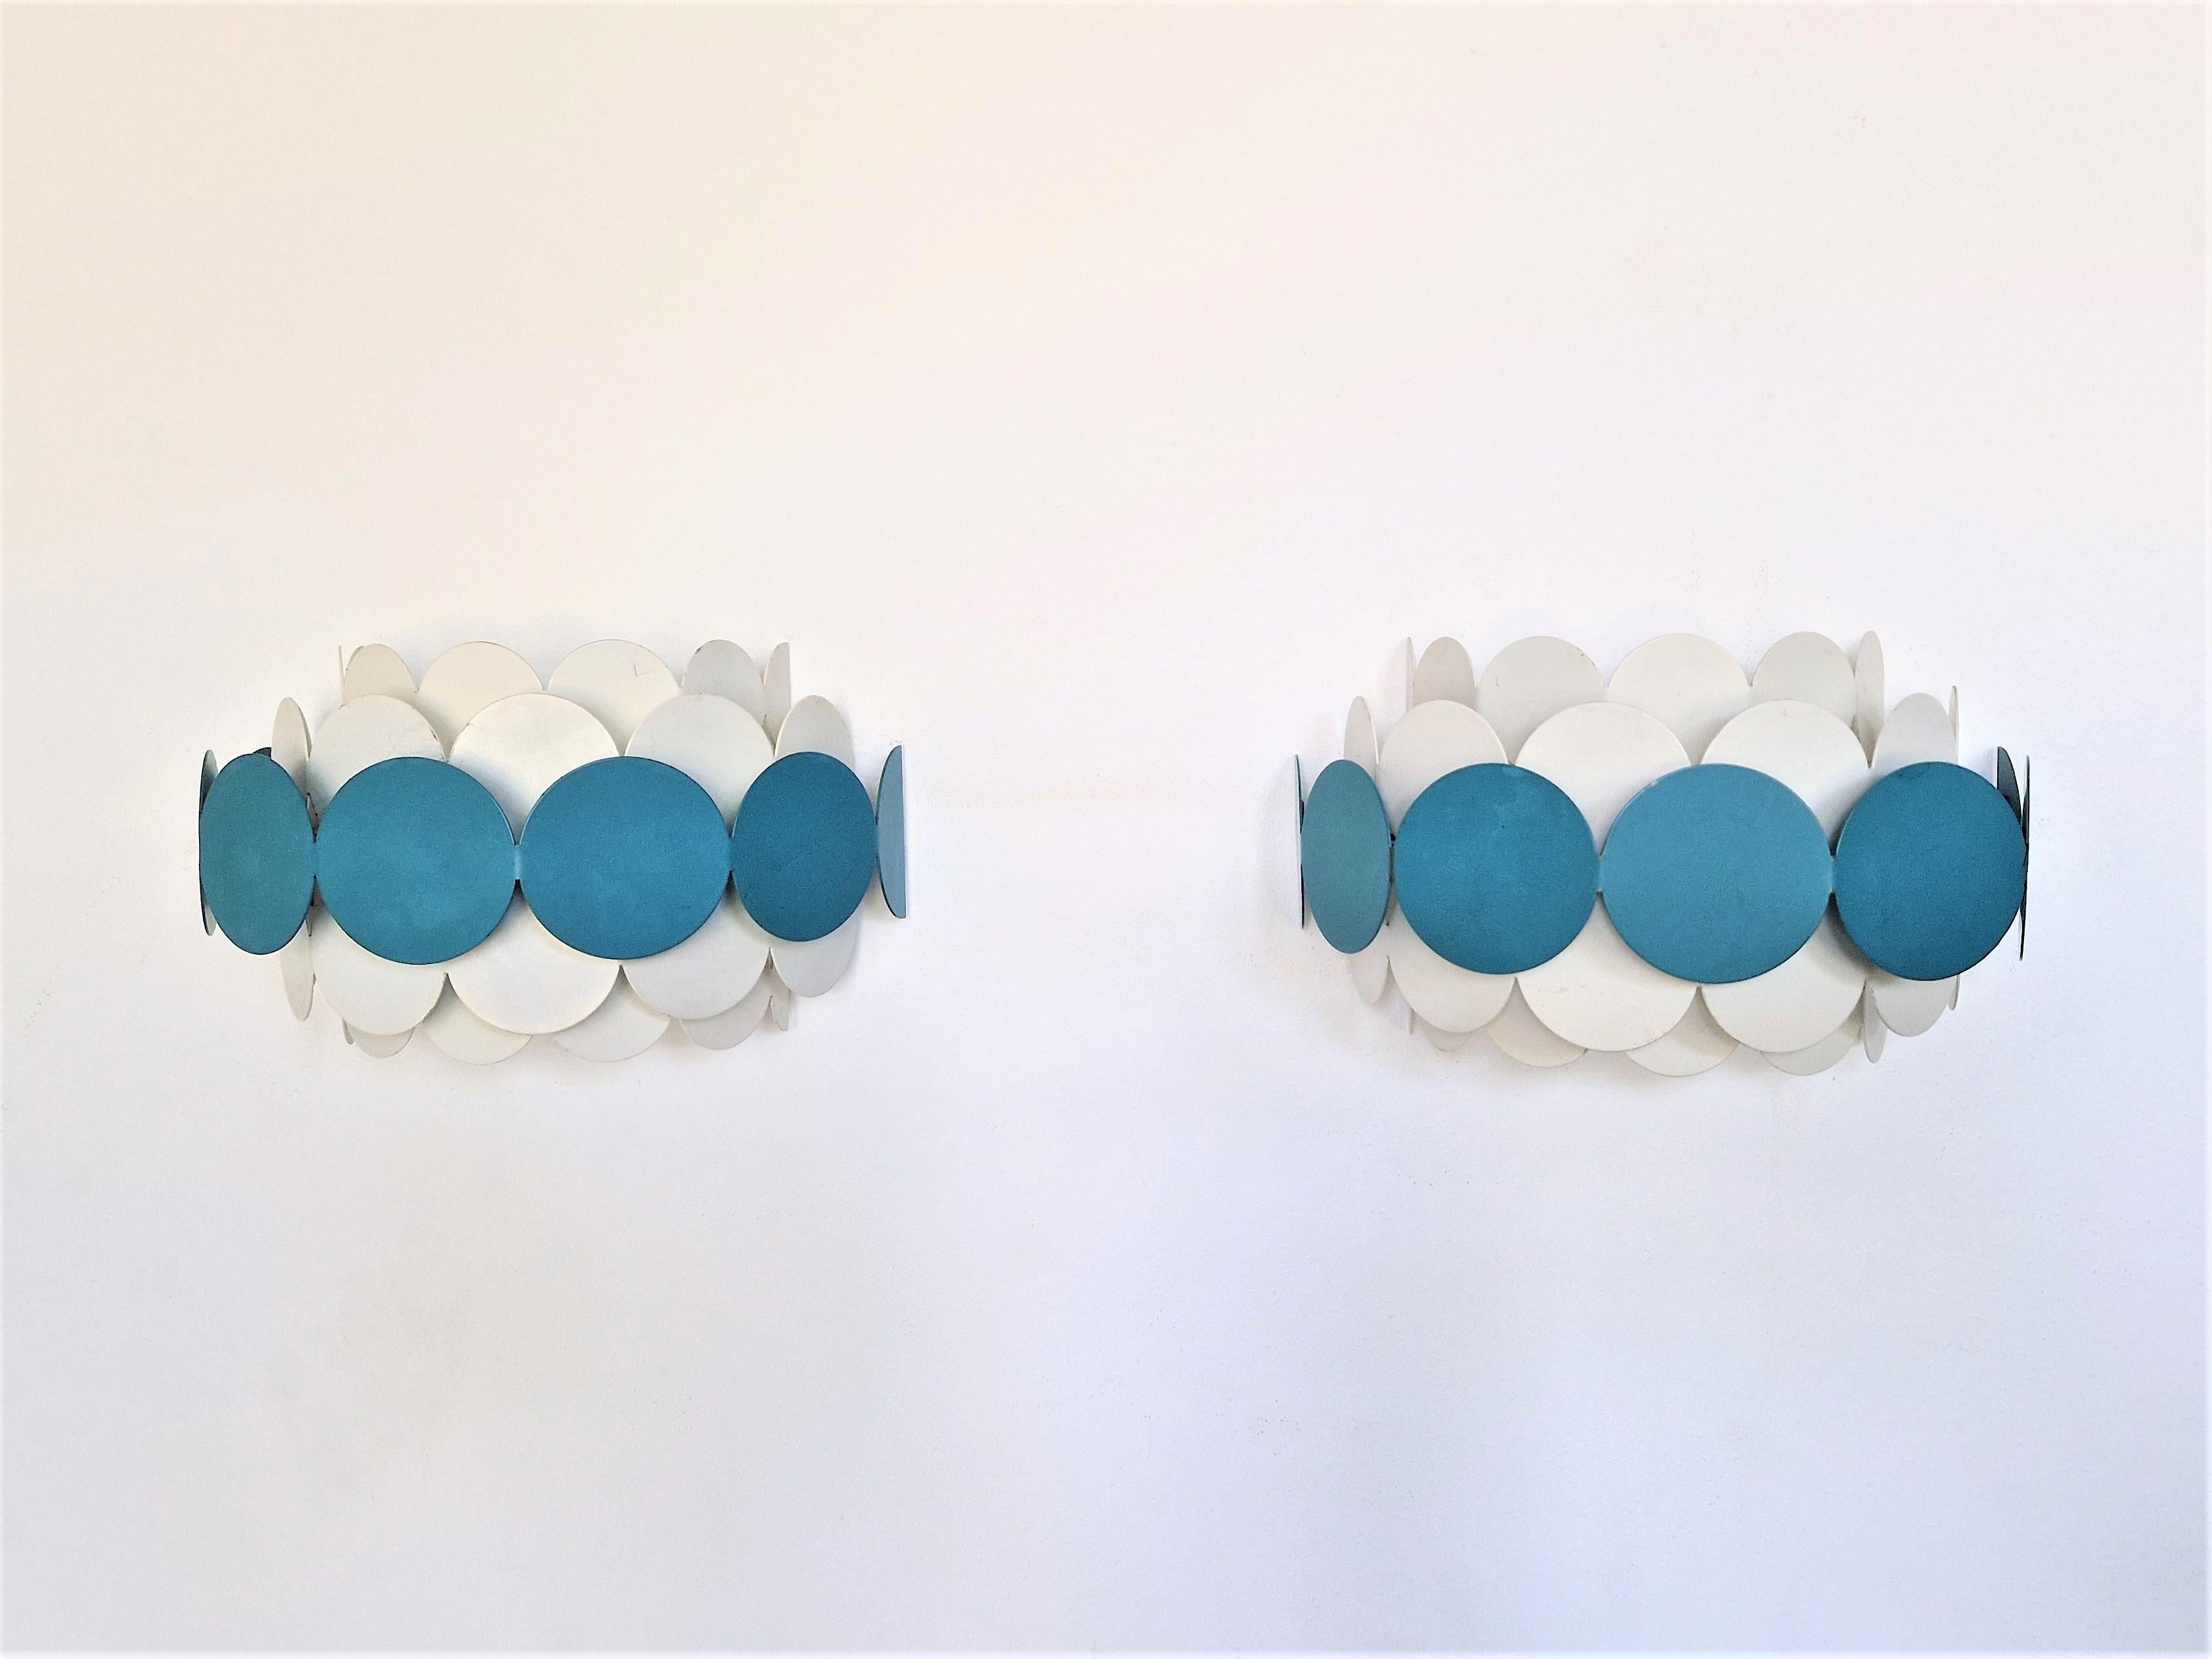 These wall lights are manufactured by Doria Leuchten in the late 1960's or 1970's. They consist out of layers of white and bright petrol blue metal strips. Both lights have a pulling cord so these can nicely be used as bedside lamps for example. The